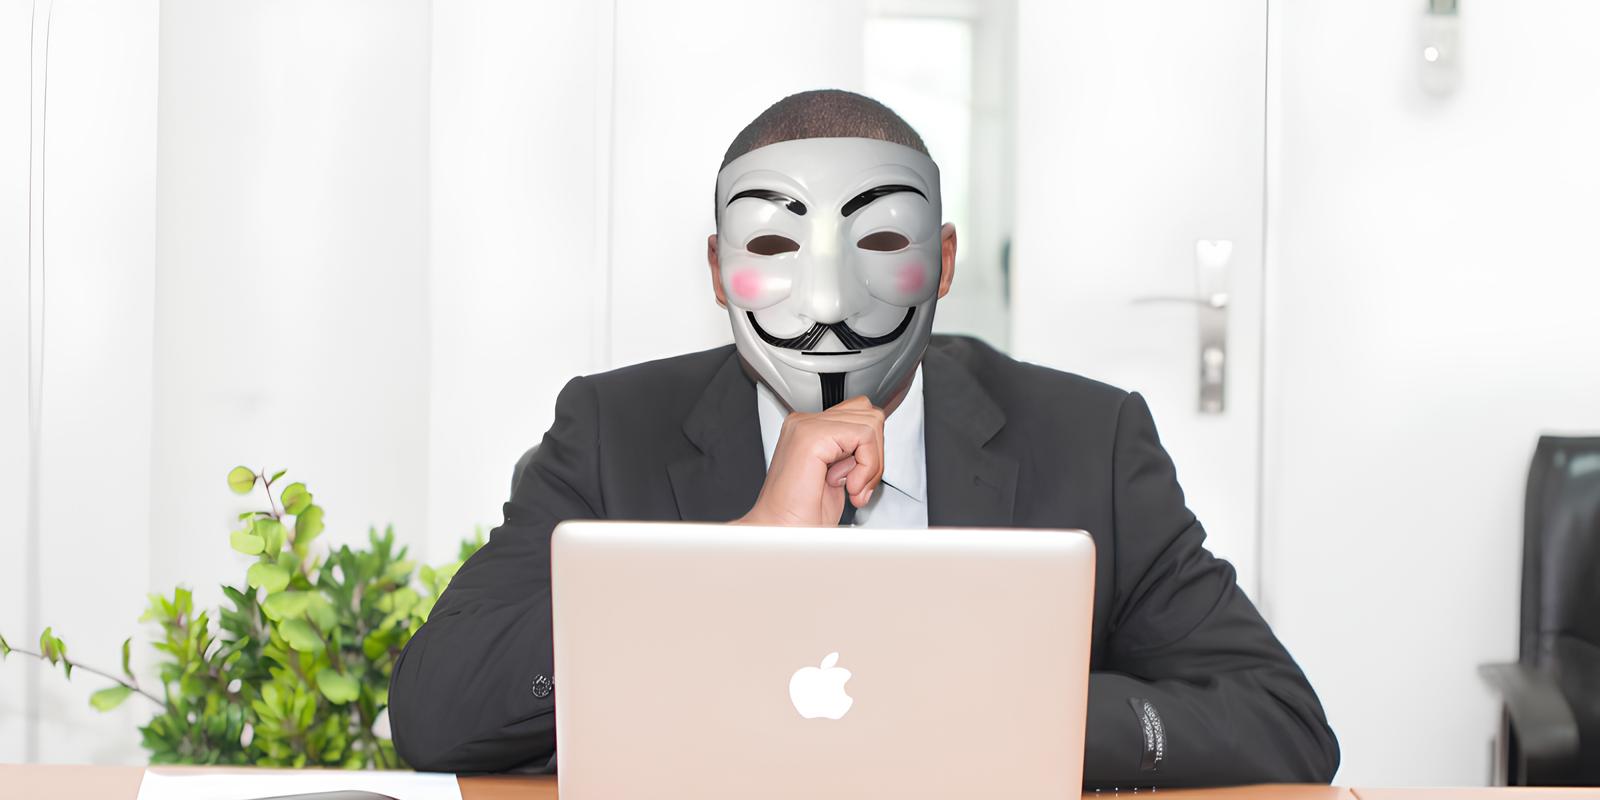 The Rising Popularity of Anonymity Online